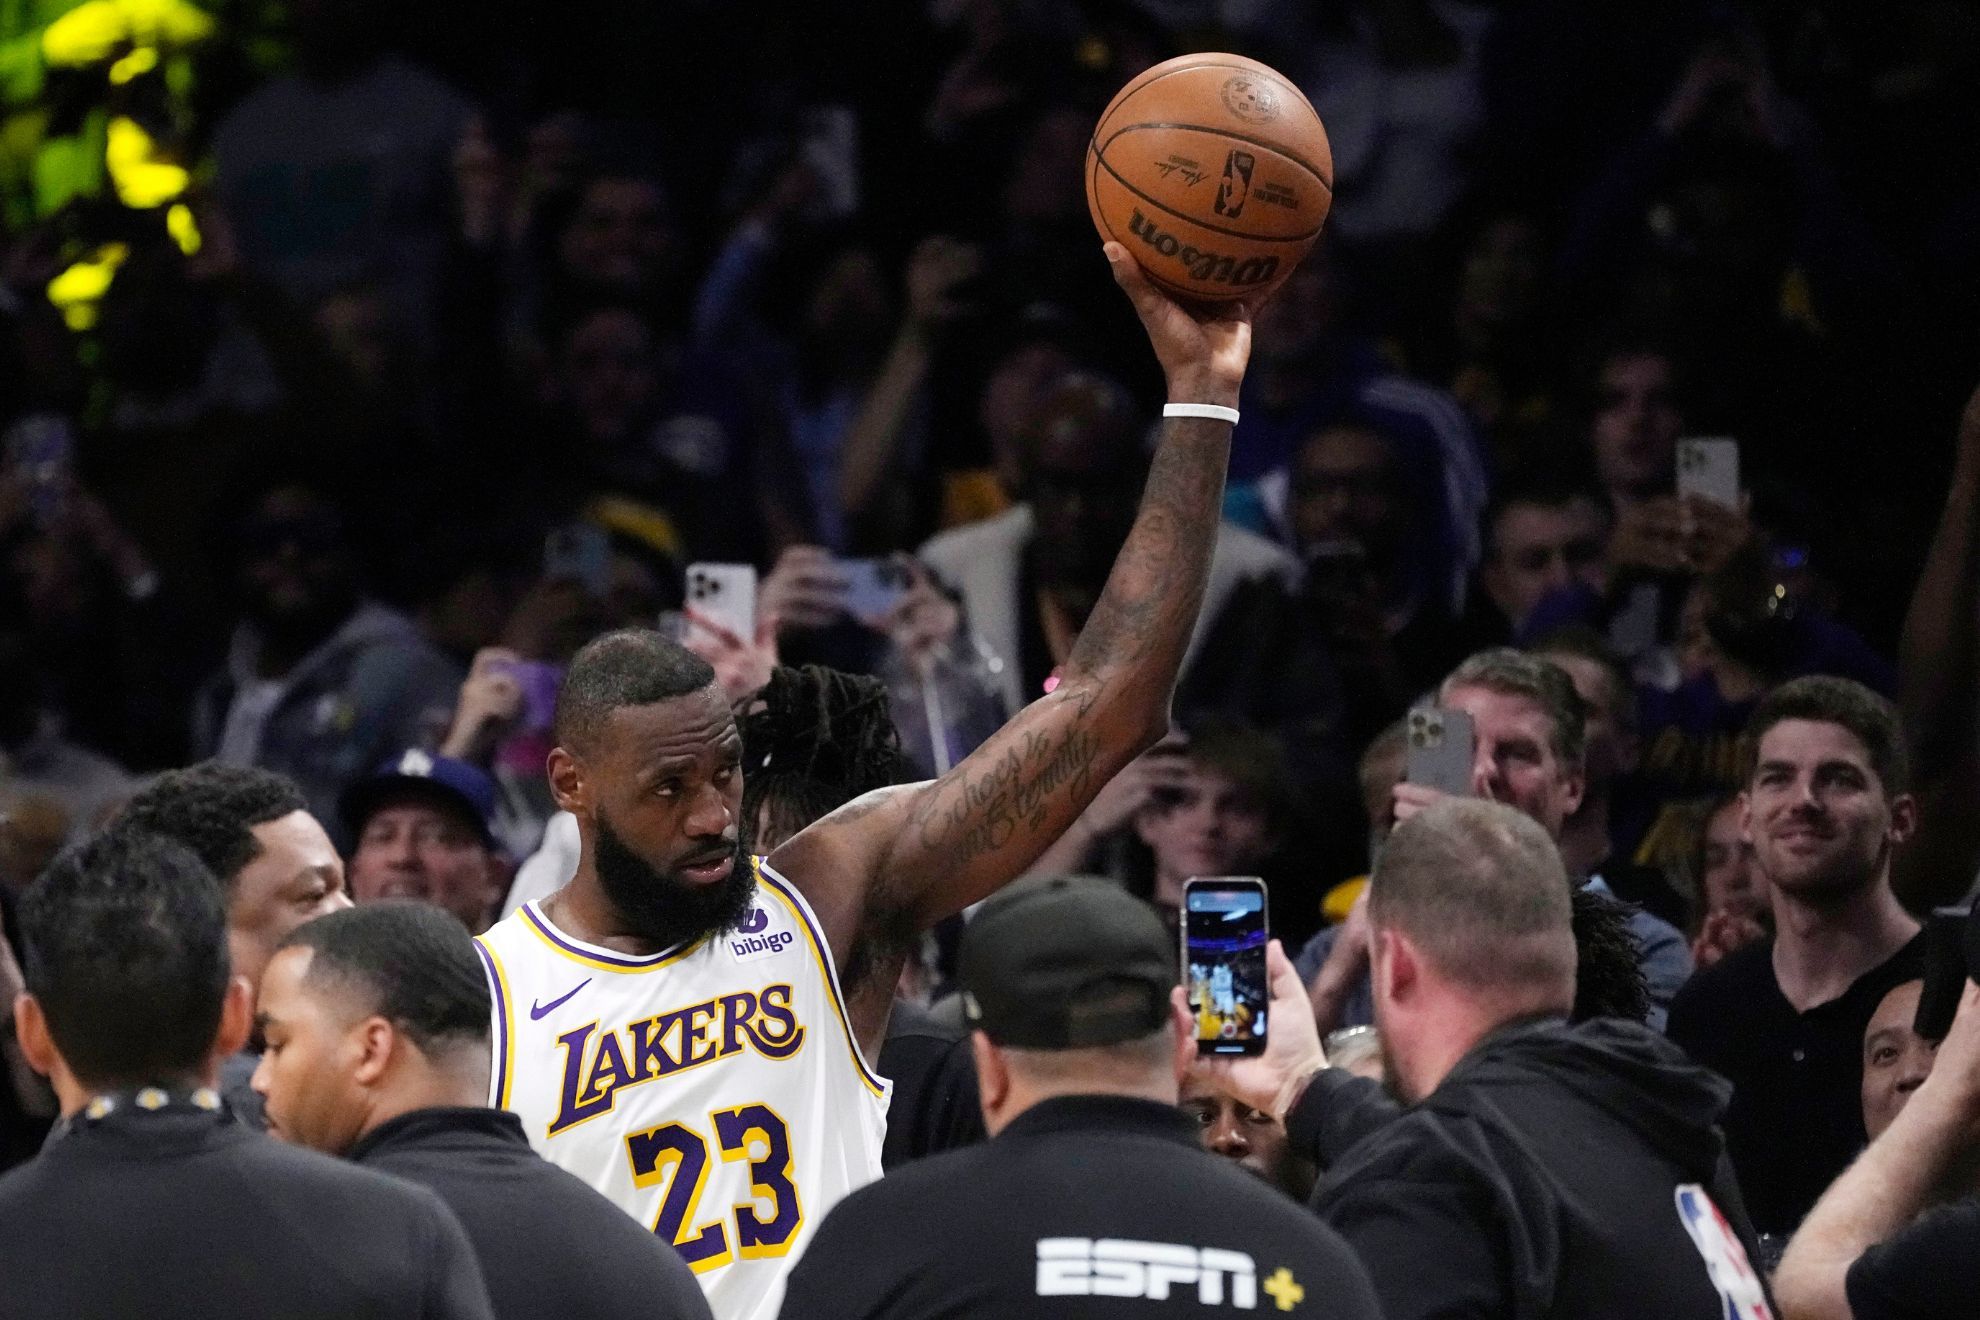 LeBron James scores easiest shot in basketball to reach 40,000 career points